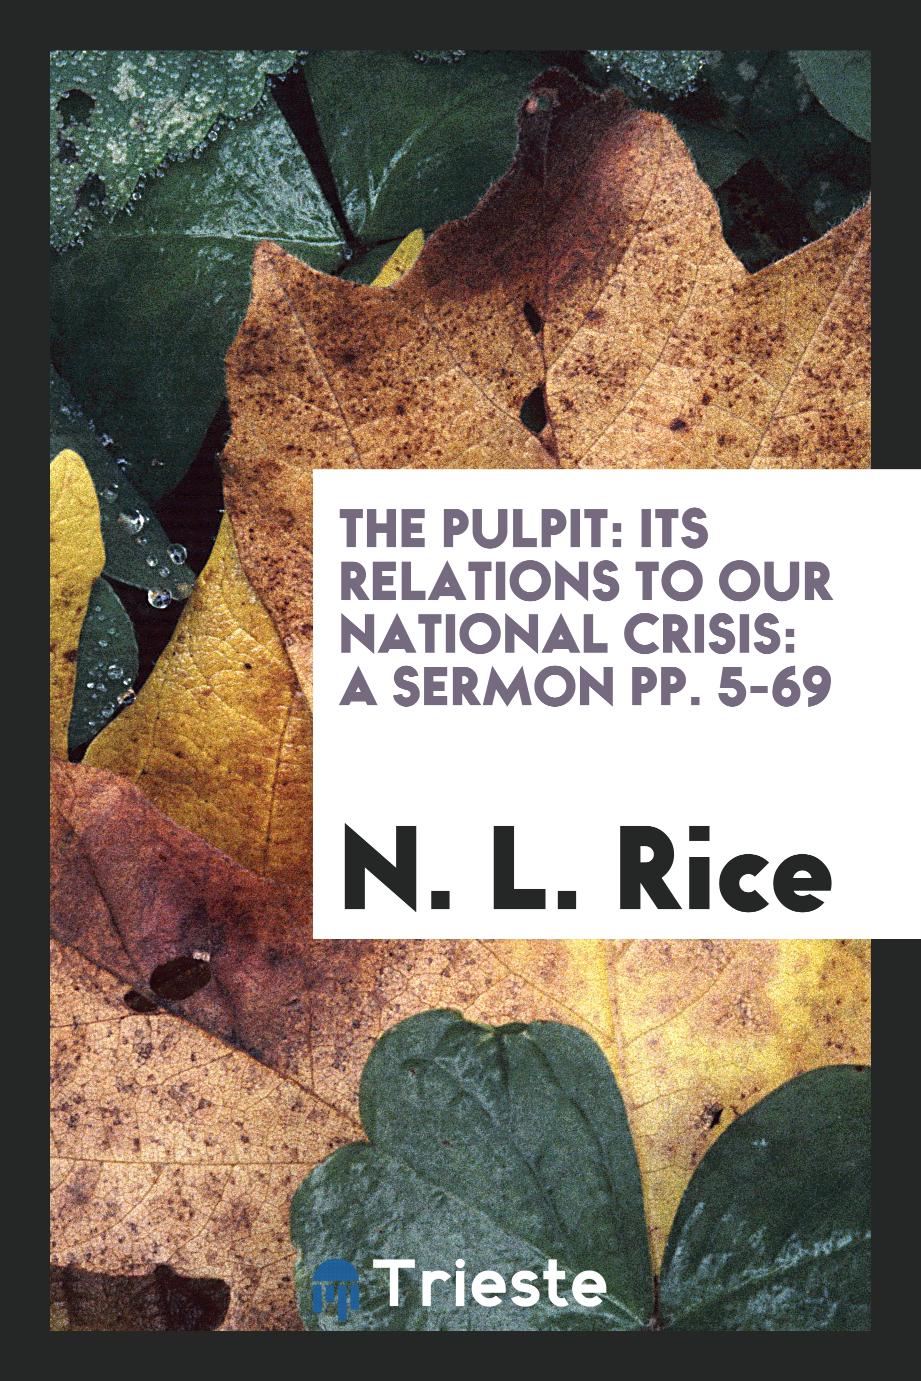 The Pulpit: Its Relations to Our National Crisis: A Sermon pp. 5-69